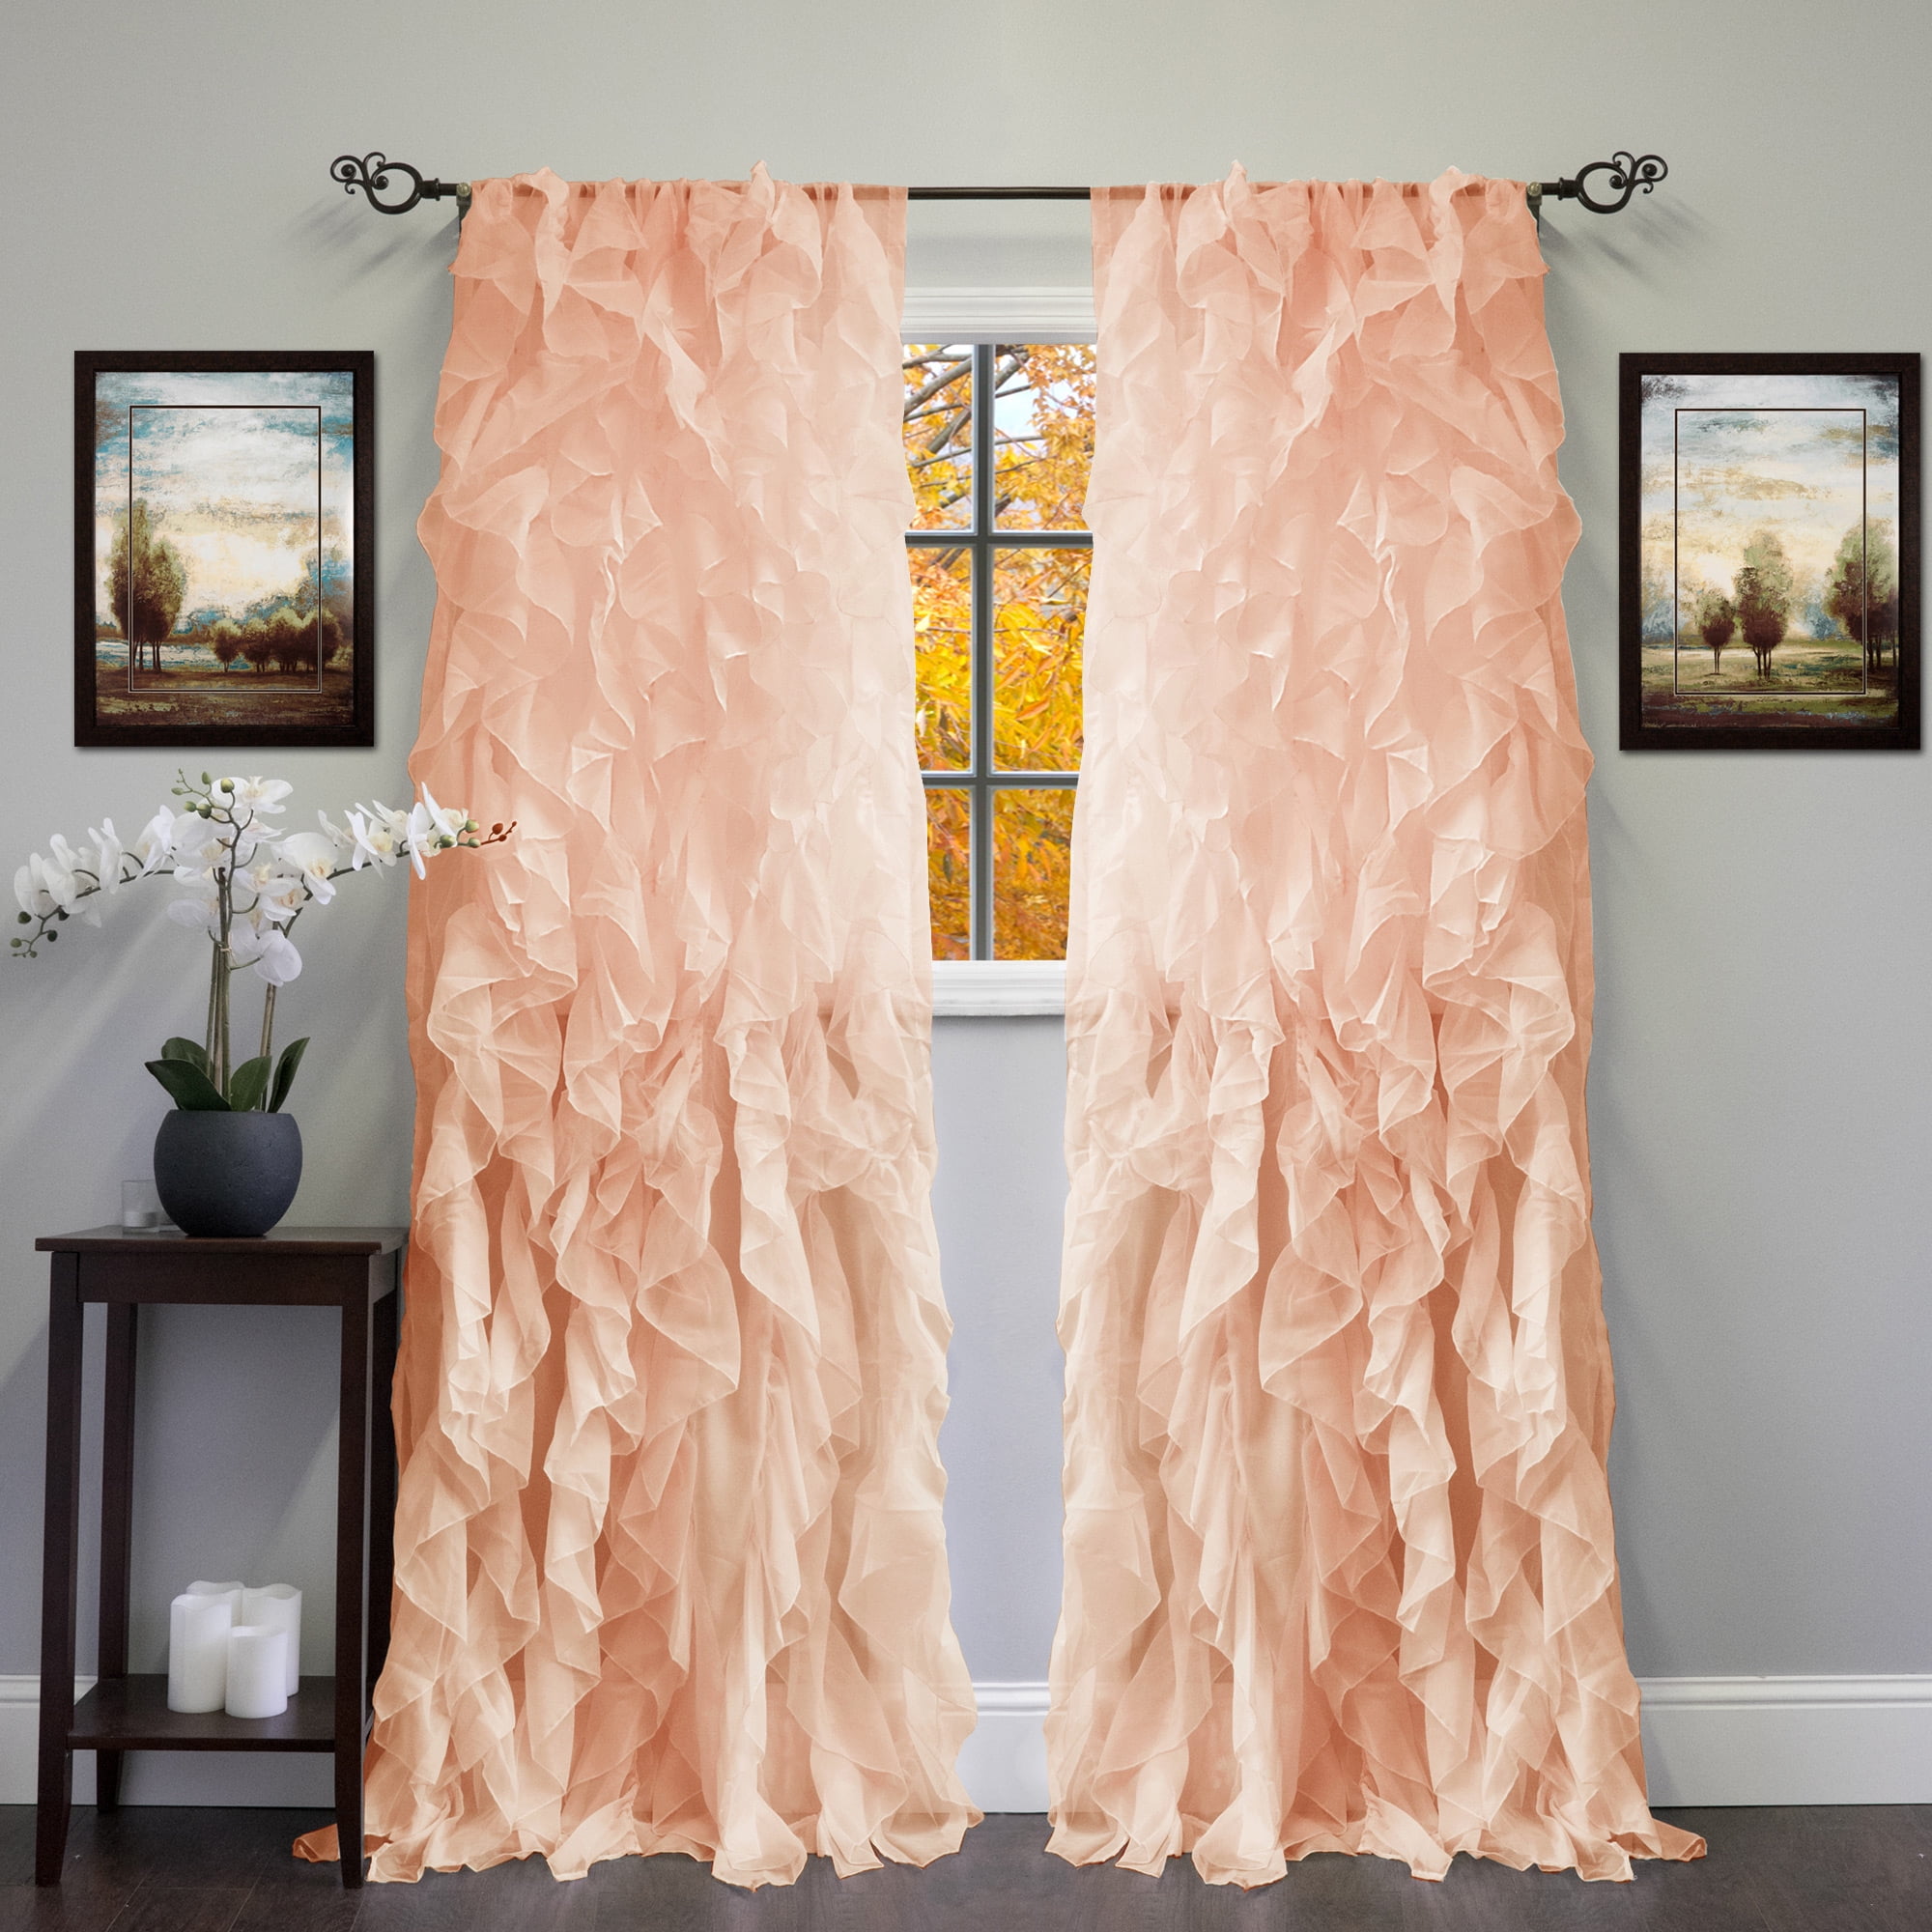 White Your Zone Ruffle Girls Bedroom Two Curtain Panels 42" x 84" 